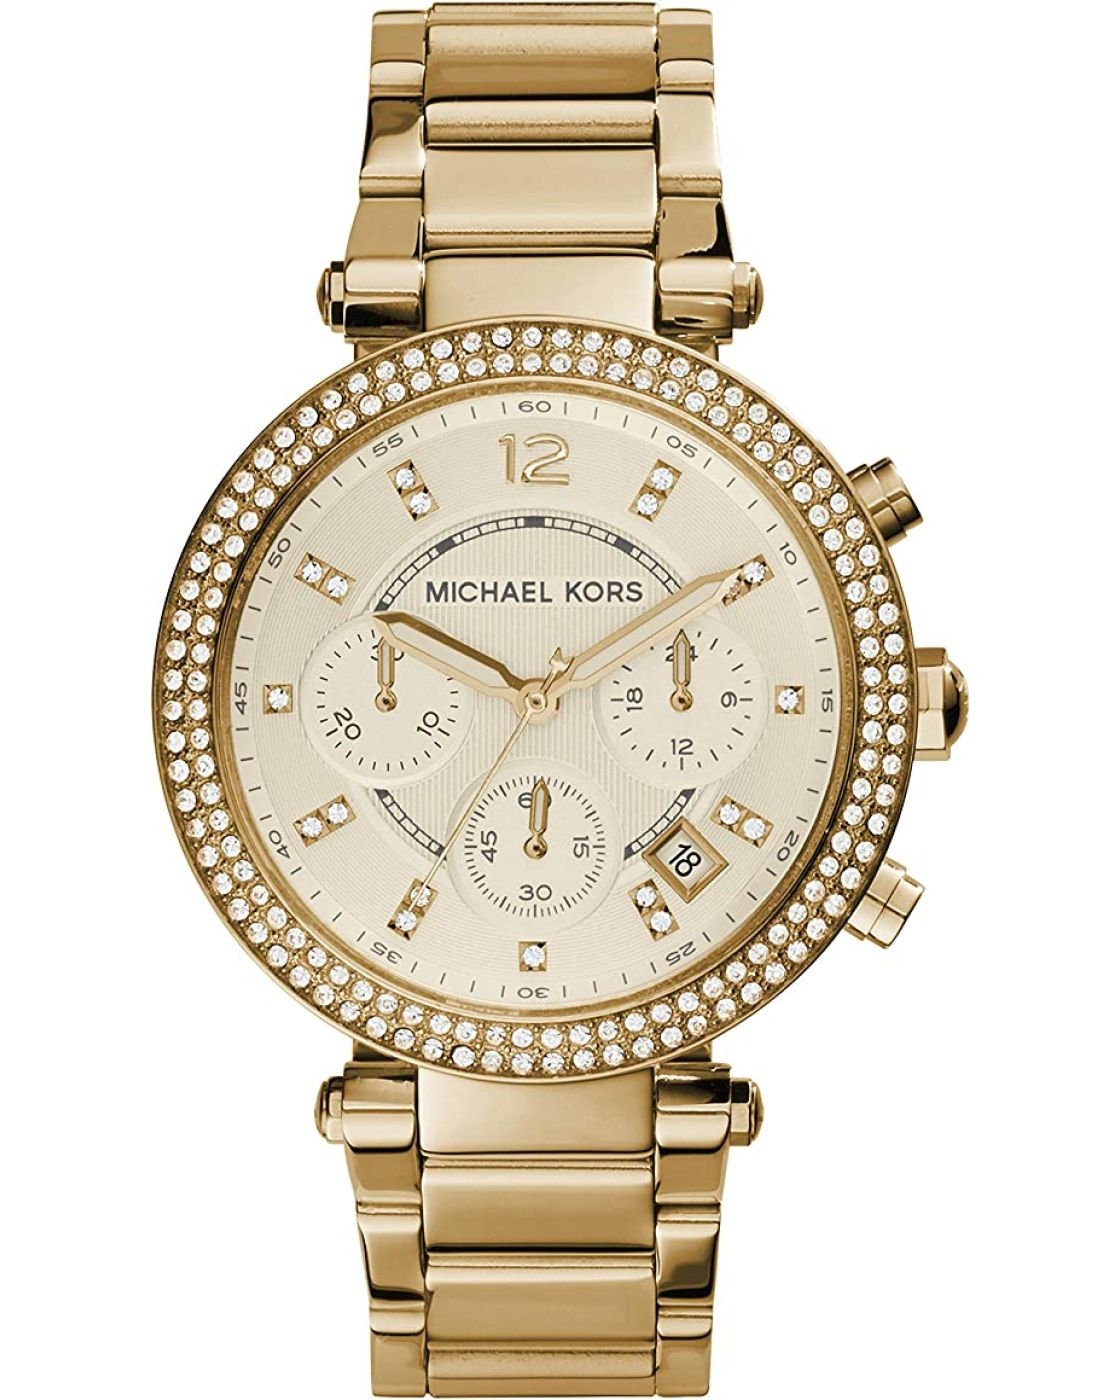 michael kors parker chronograph mk5354 gold case with stainless steel bracelet image1